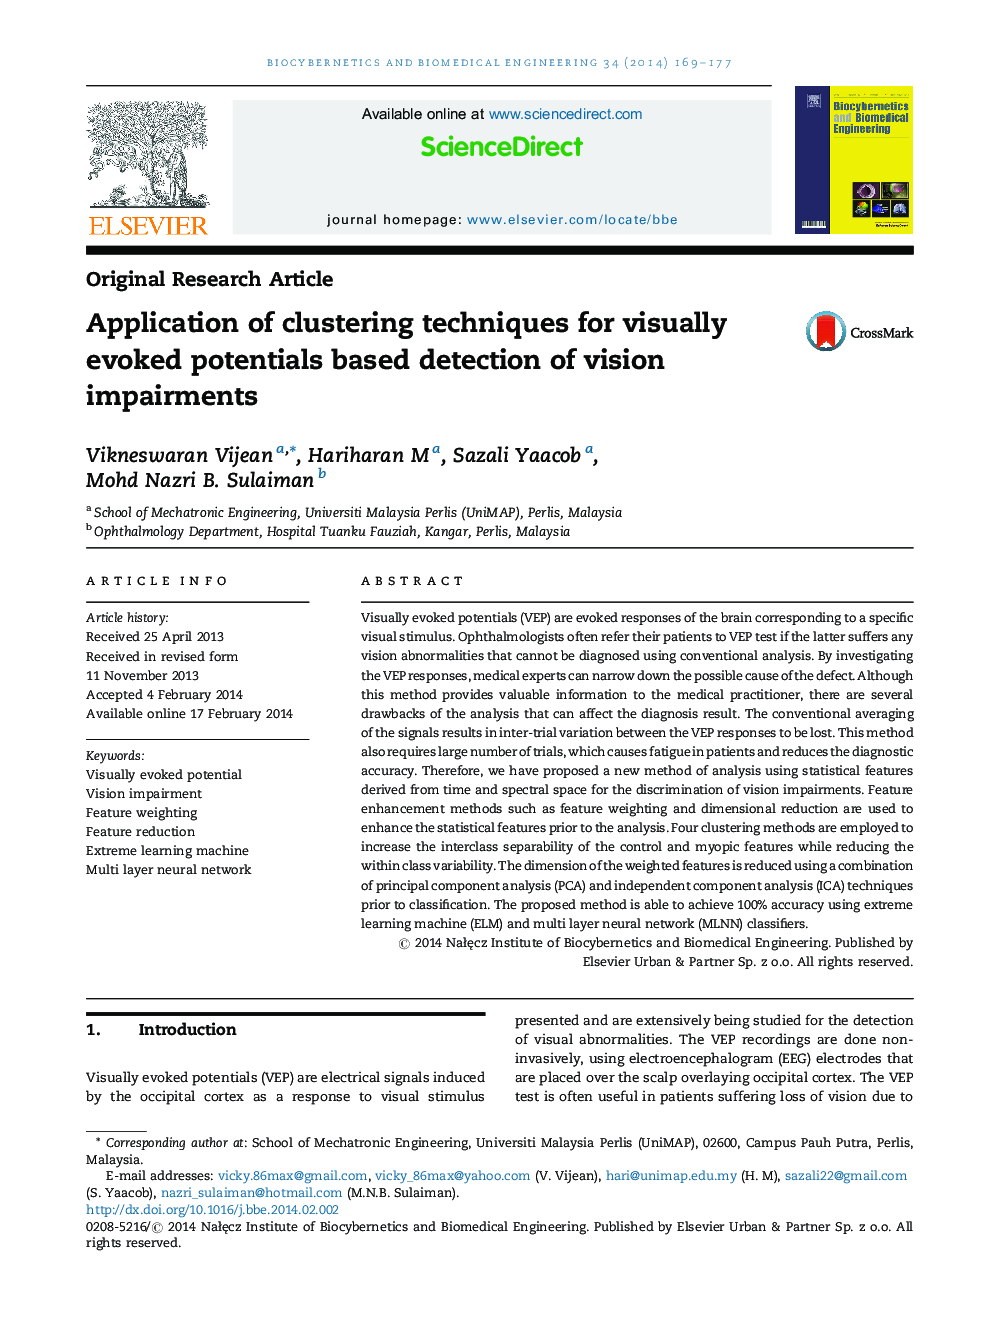 Application of clustering techniques for visually evoked potentials based detection of vision impairments